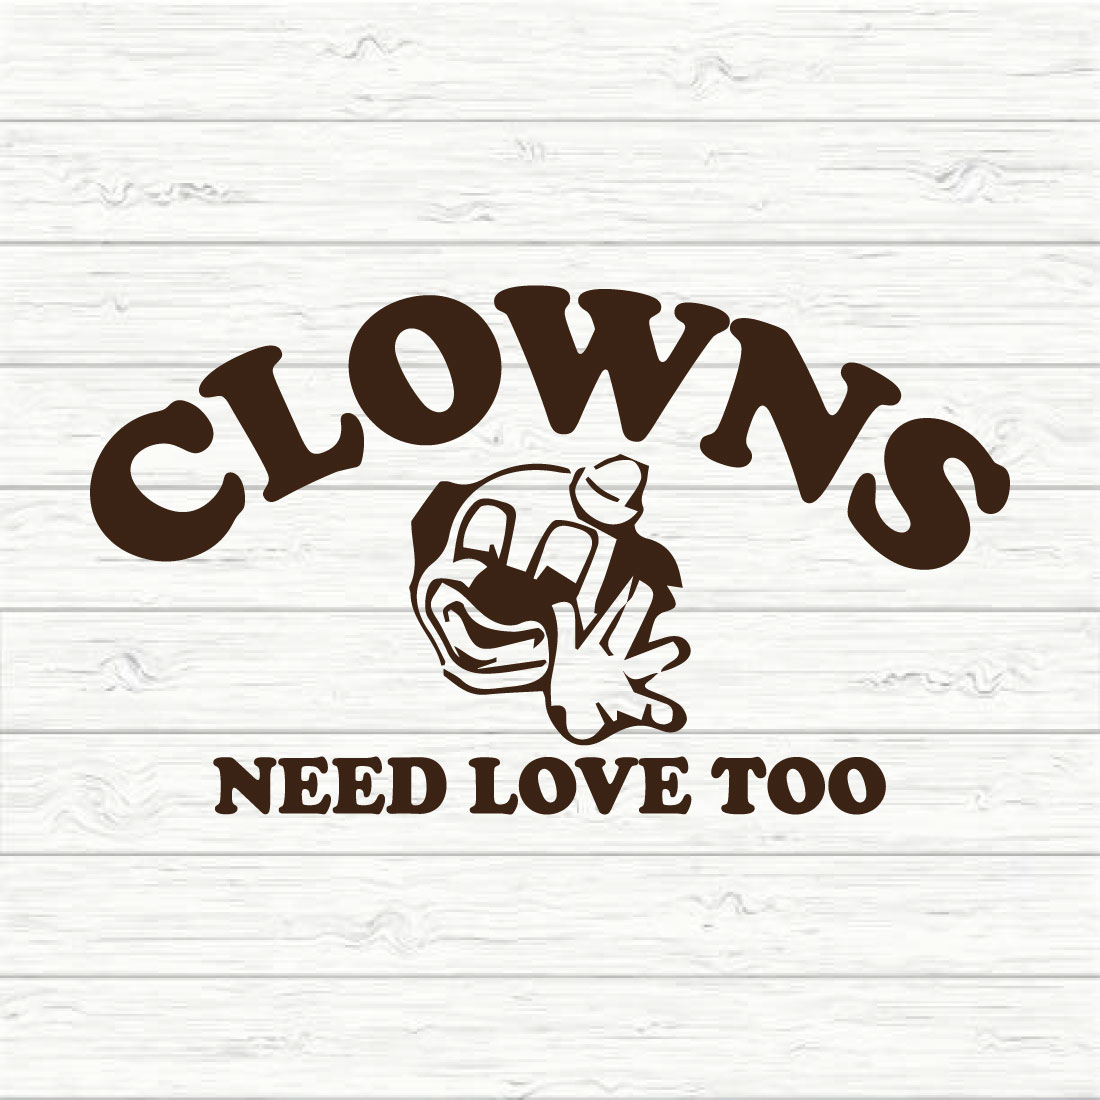 Clowns Need Love Too preview image.